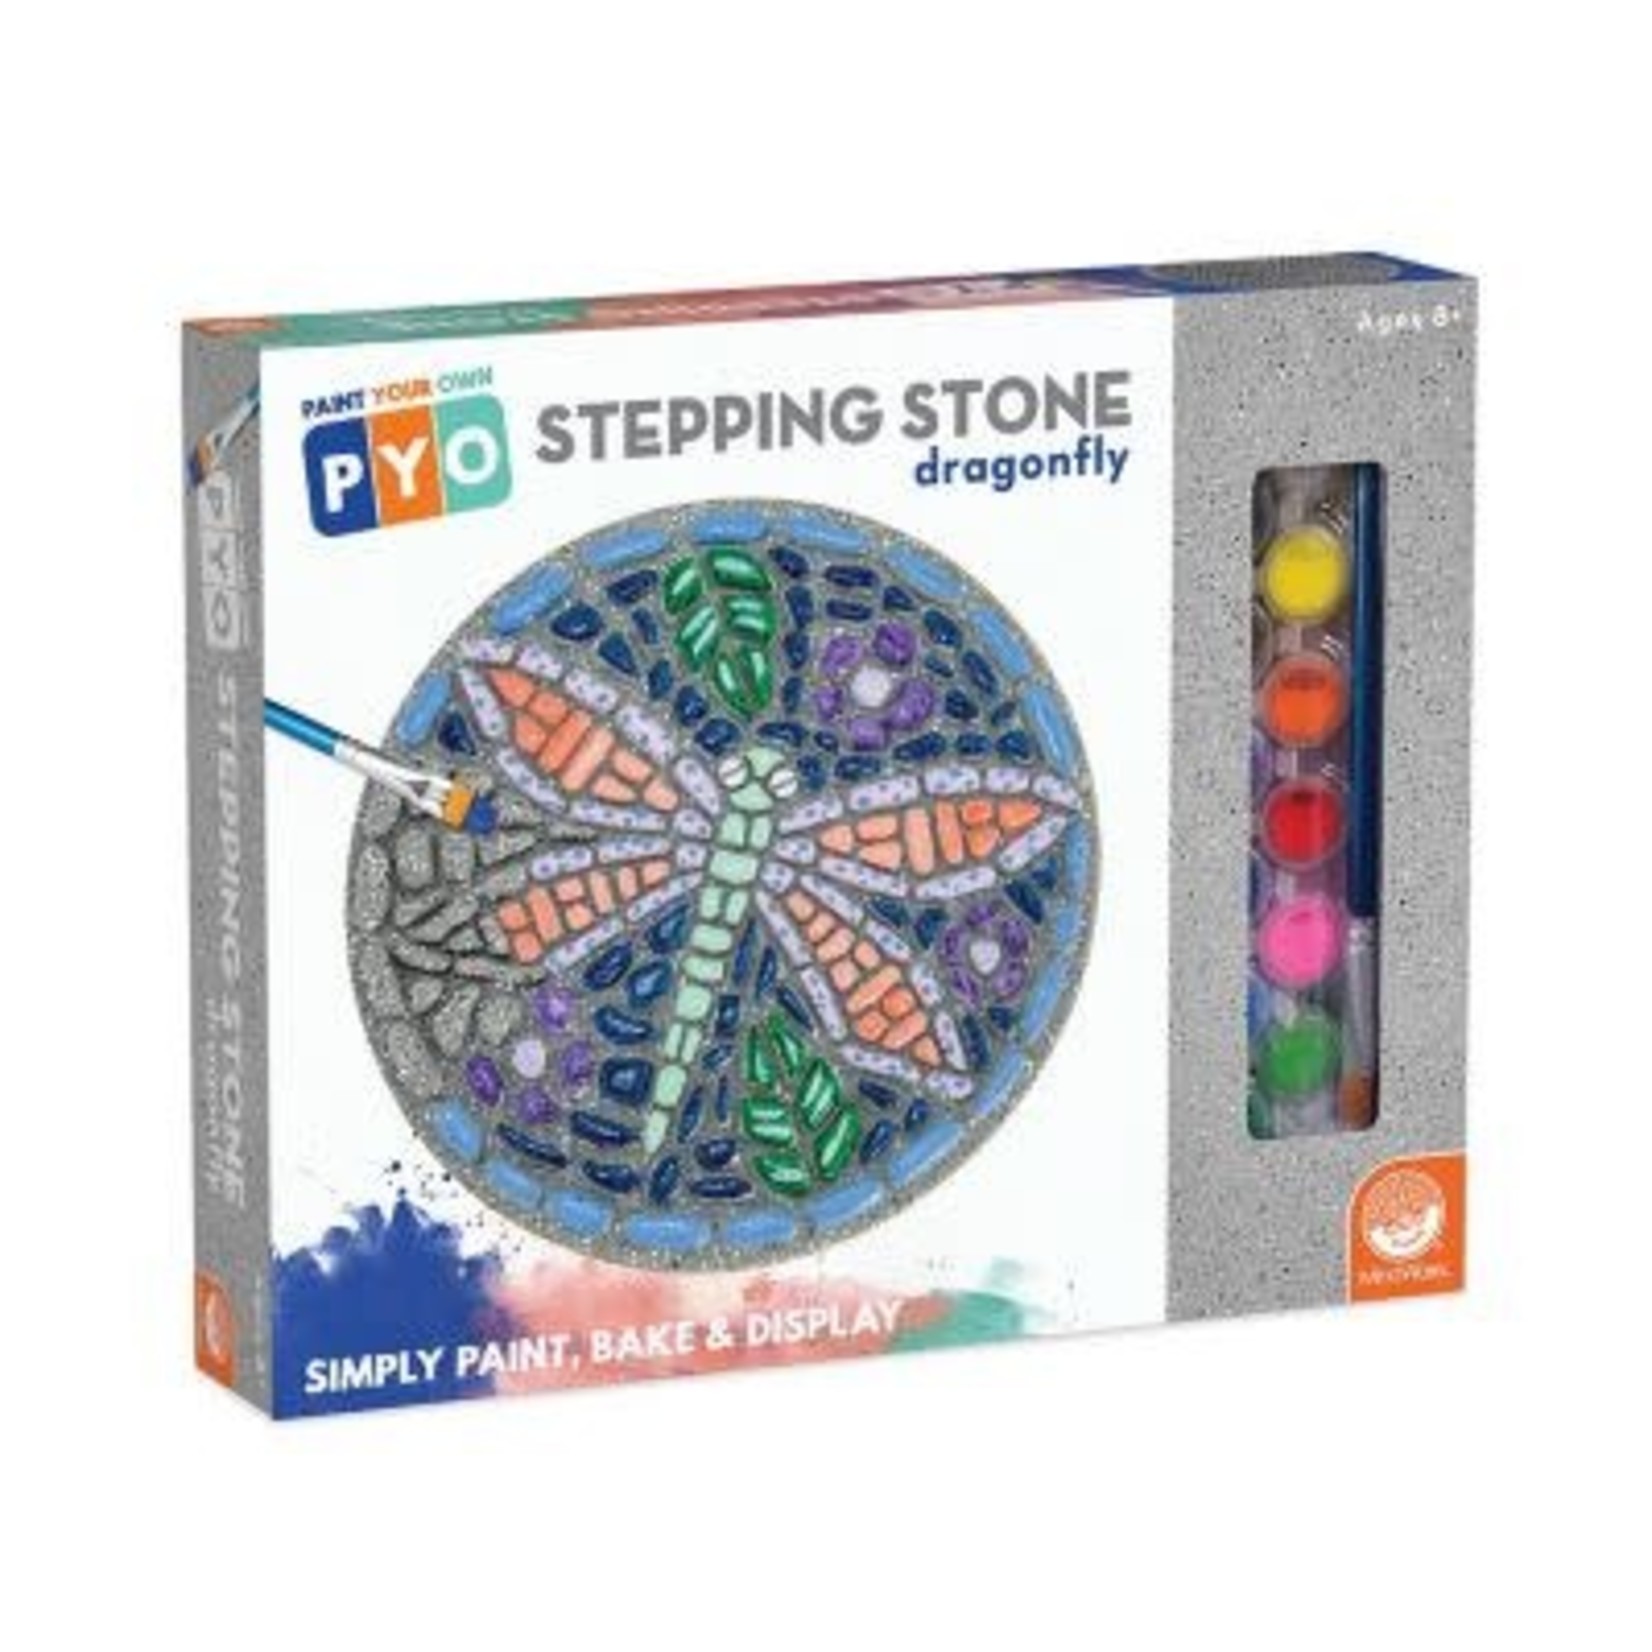 Mindware Paint Your Own Stepping Stone - Dragonfly